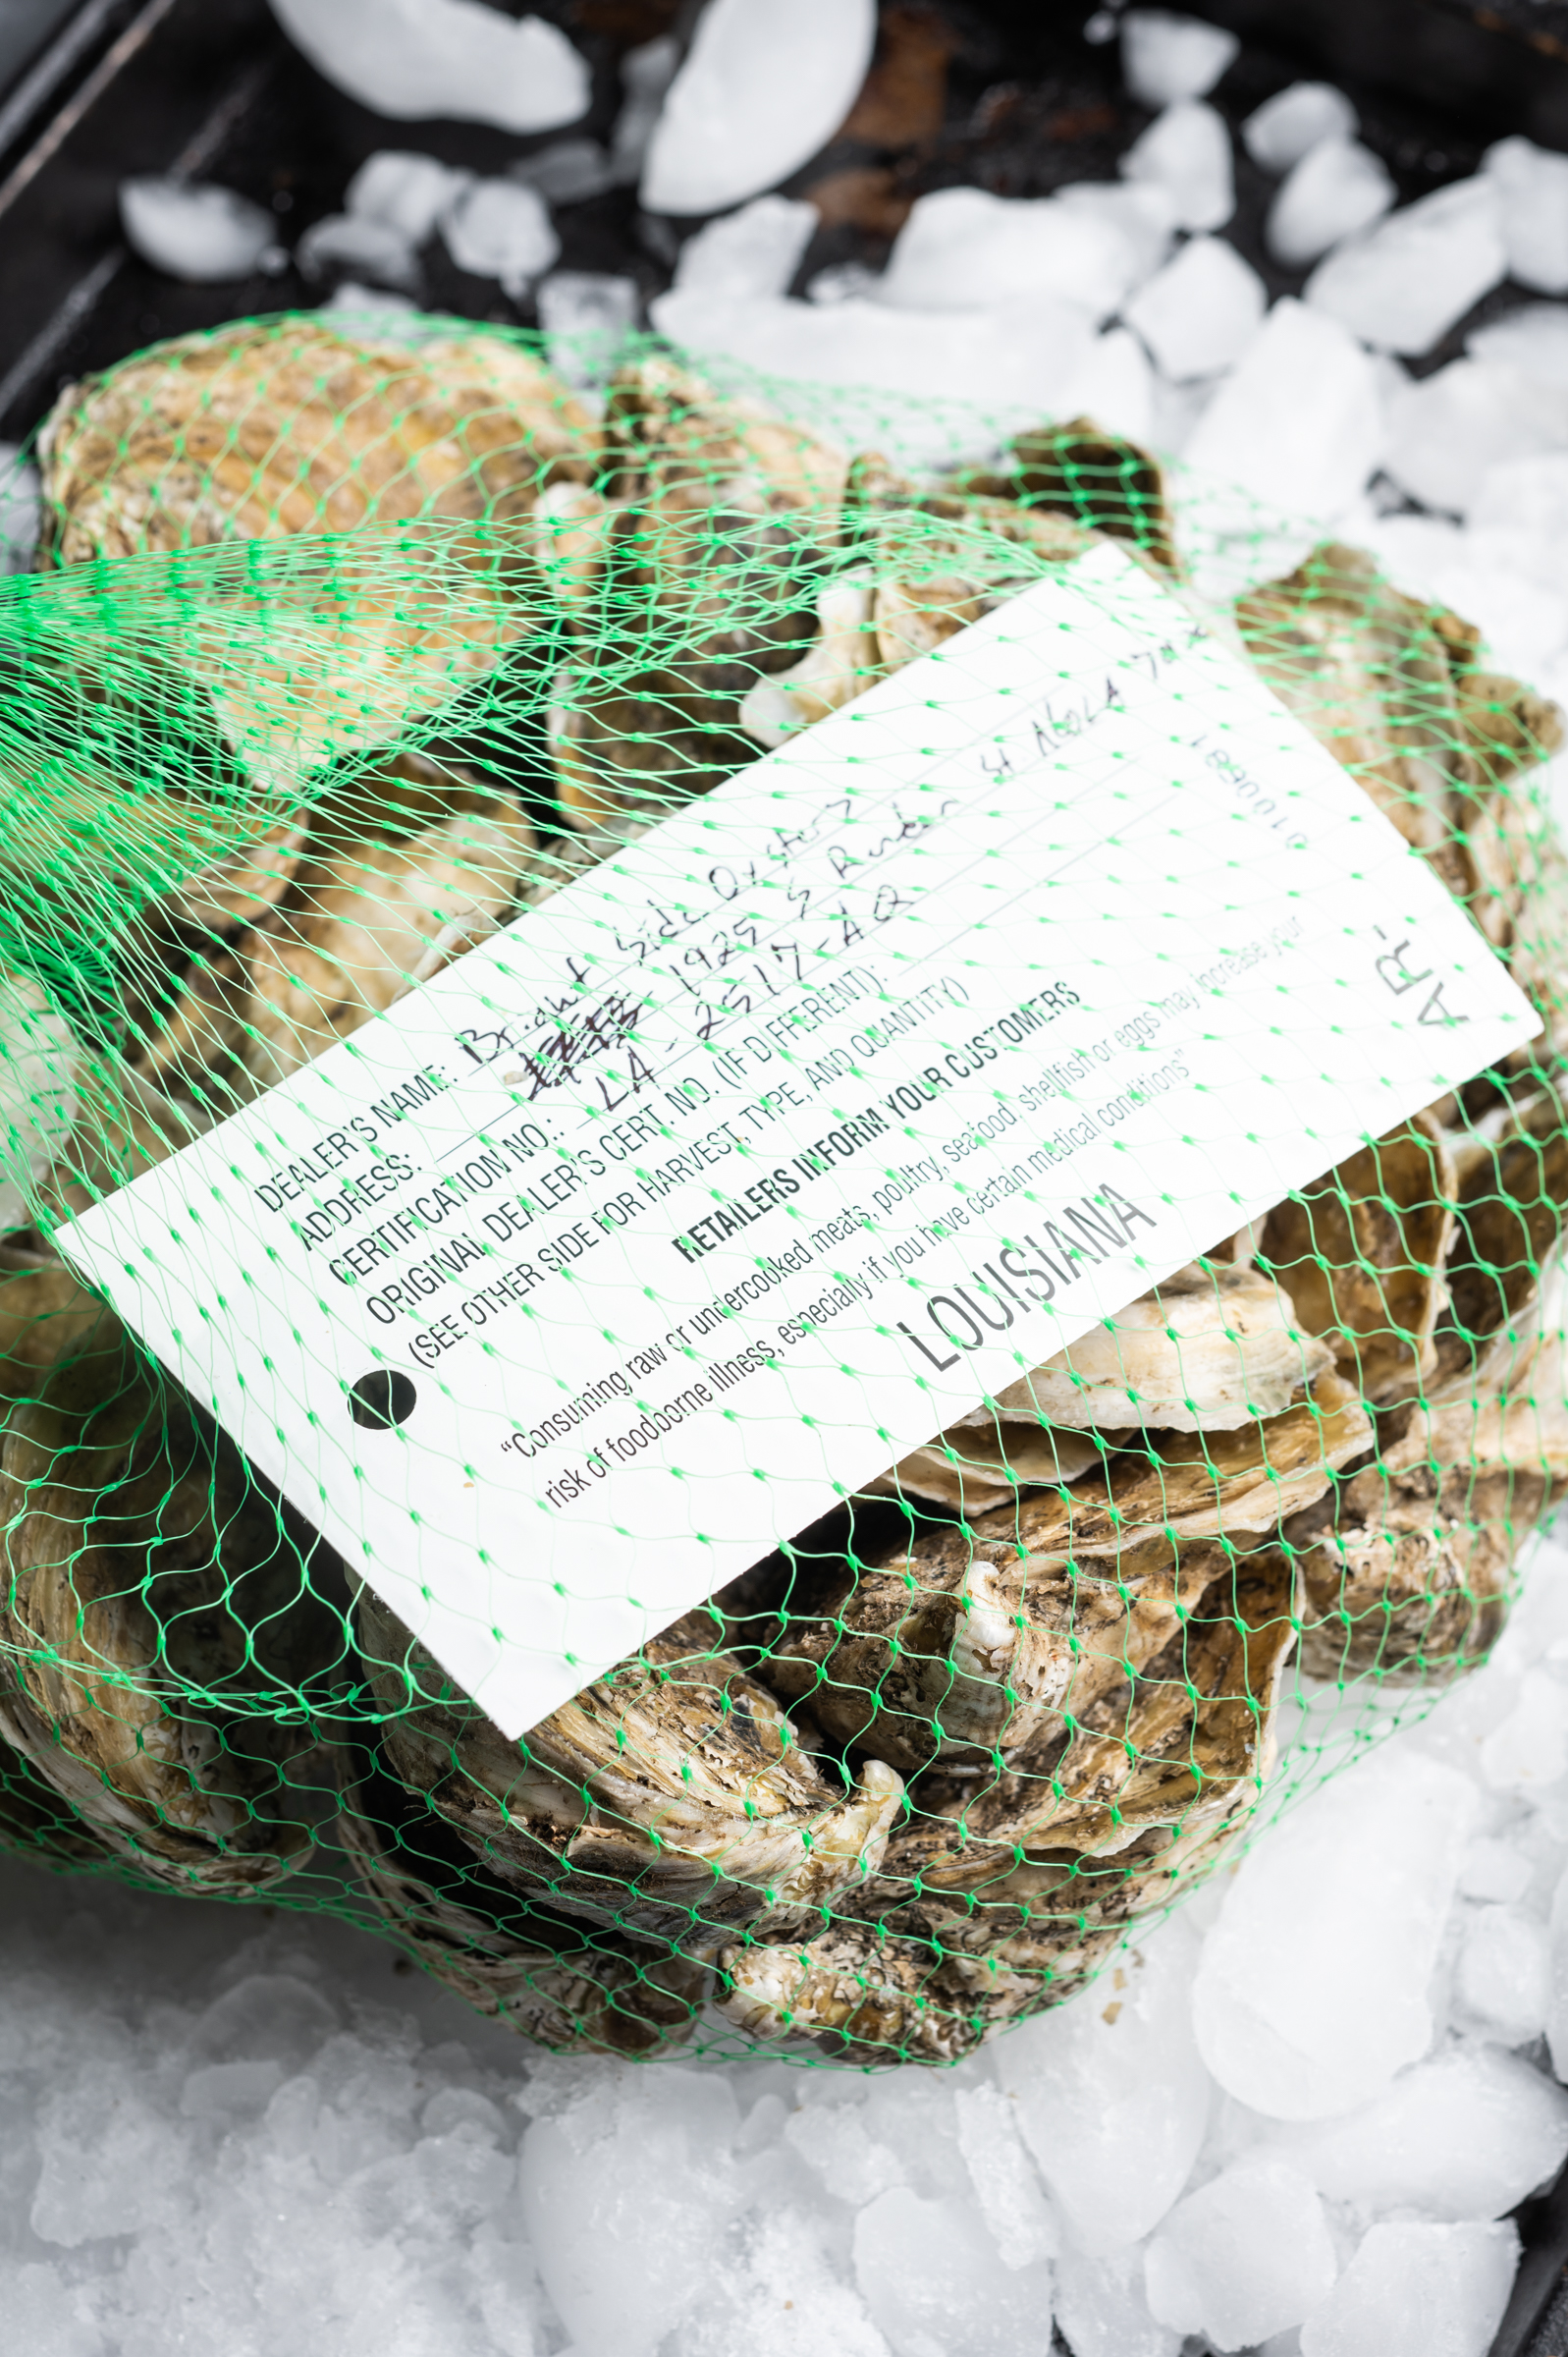 A sack of freshly harvested Bright Side oysters